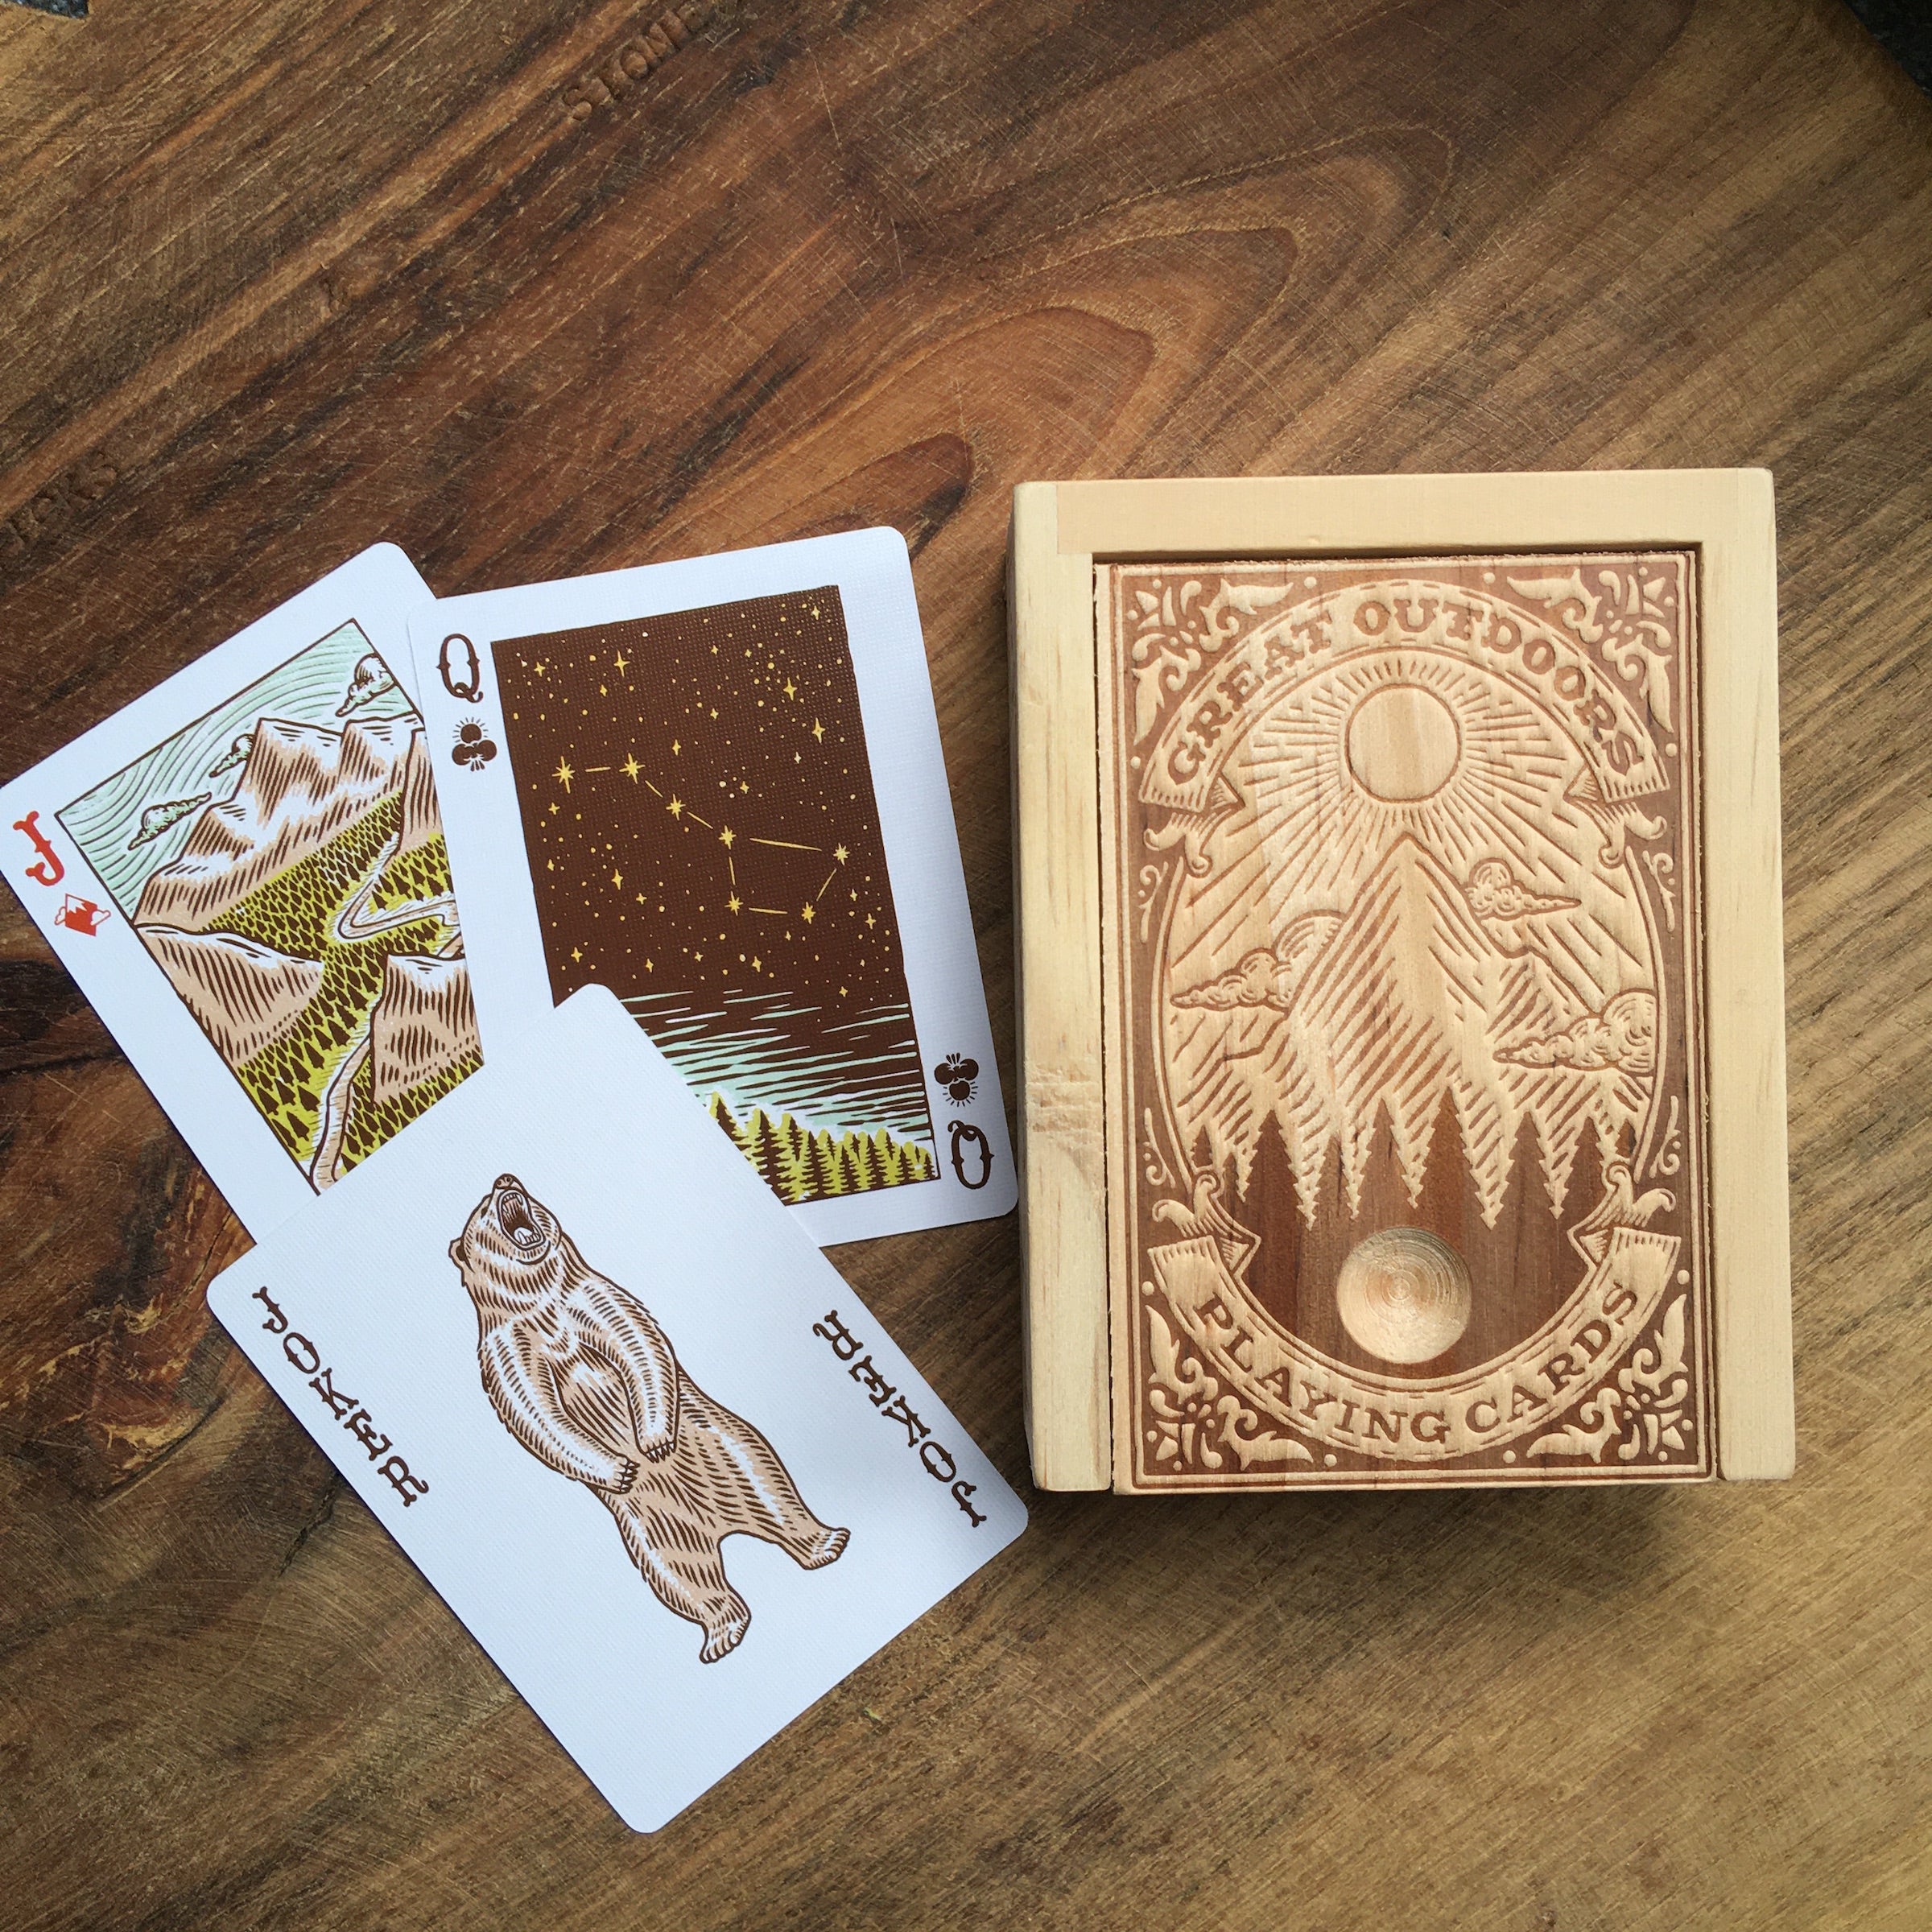 'Great Outdoors Playing Cards'